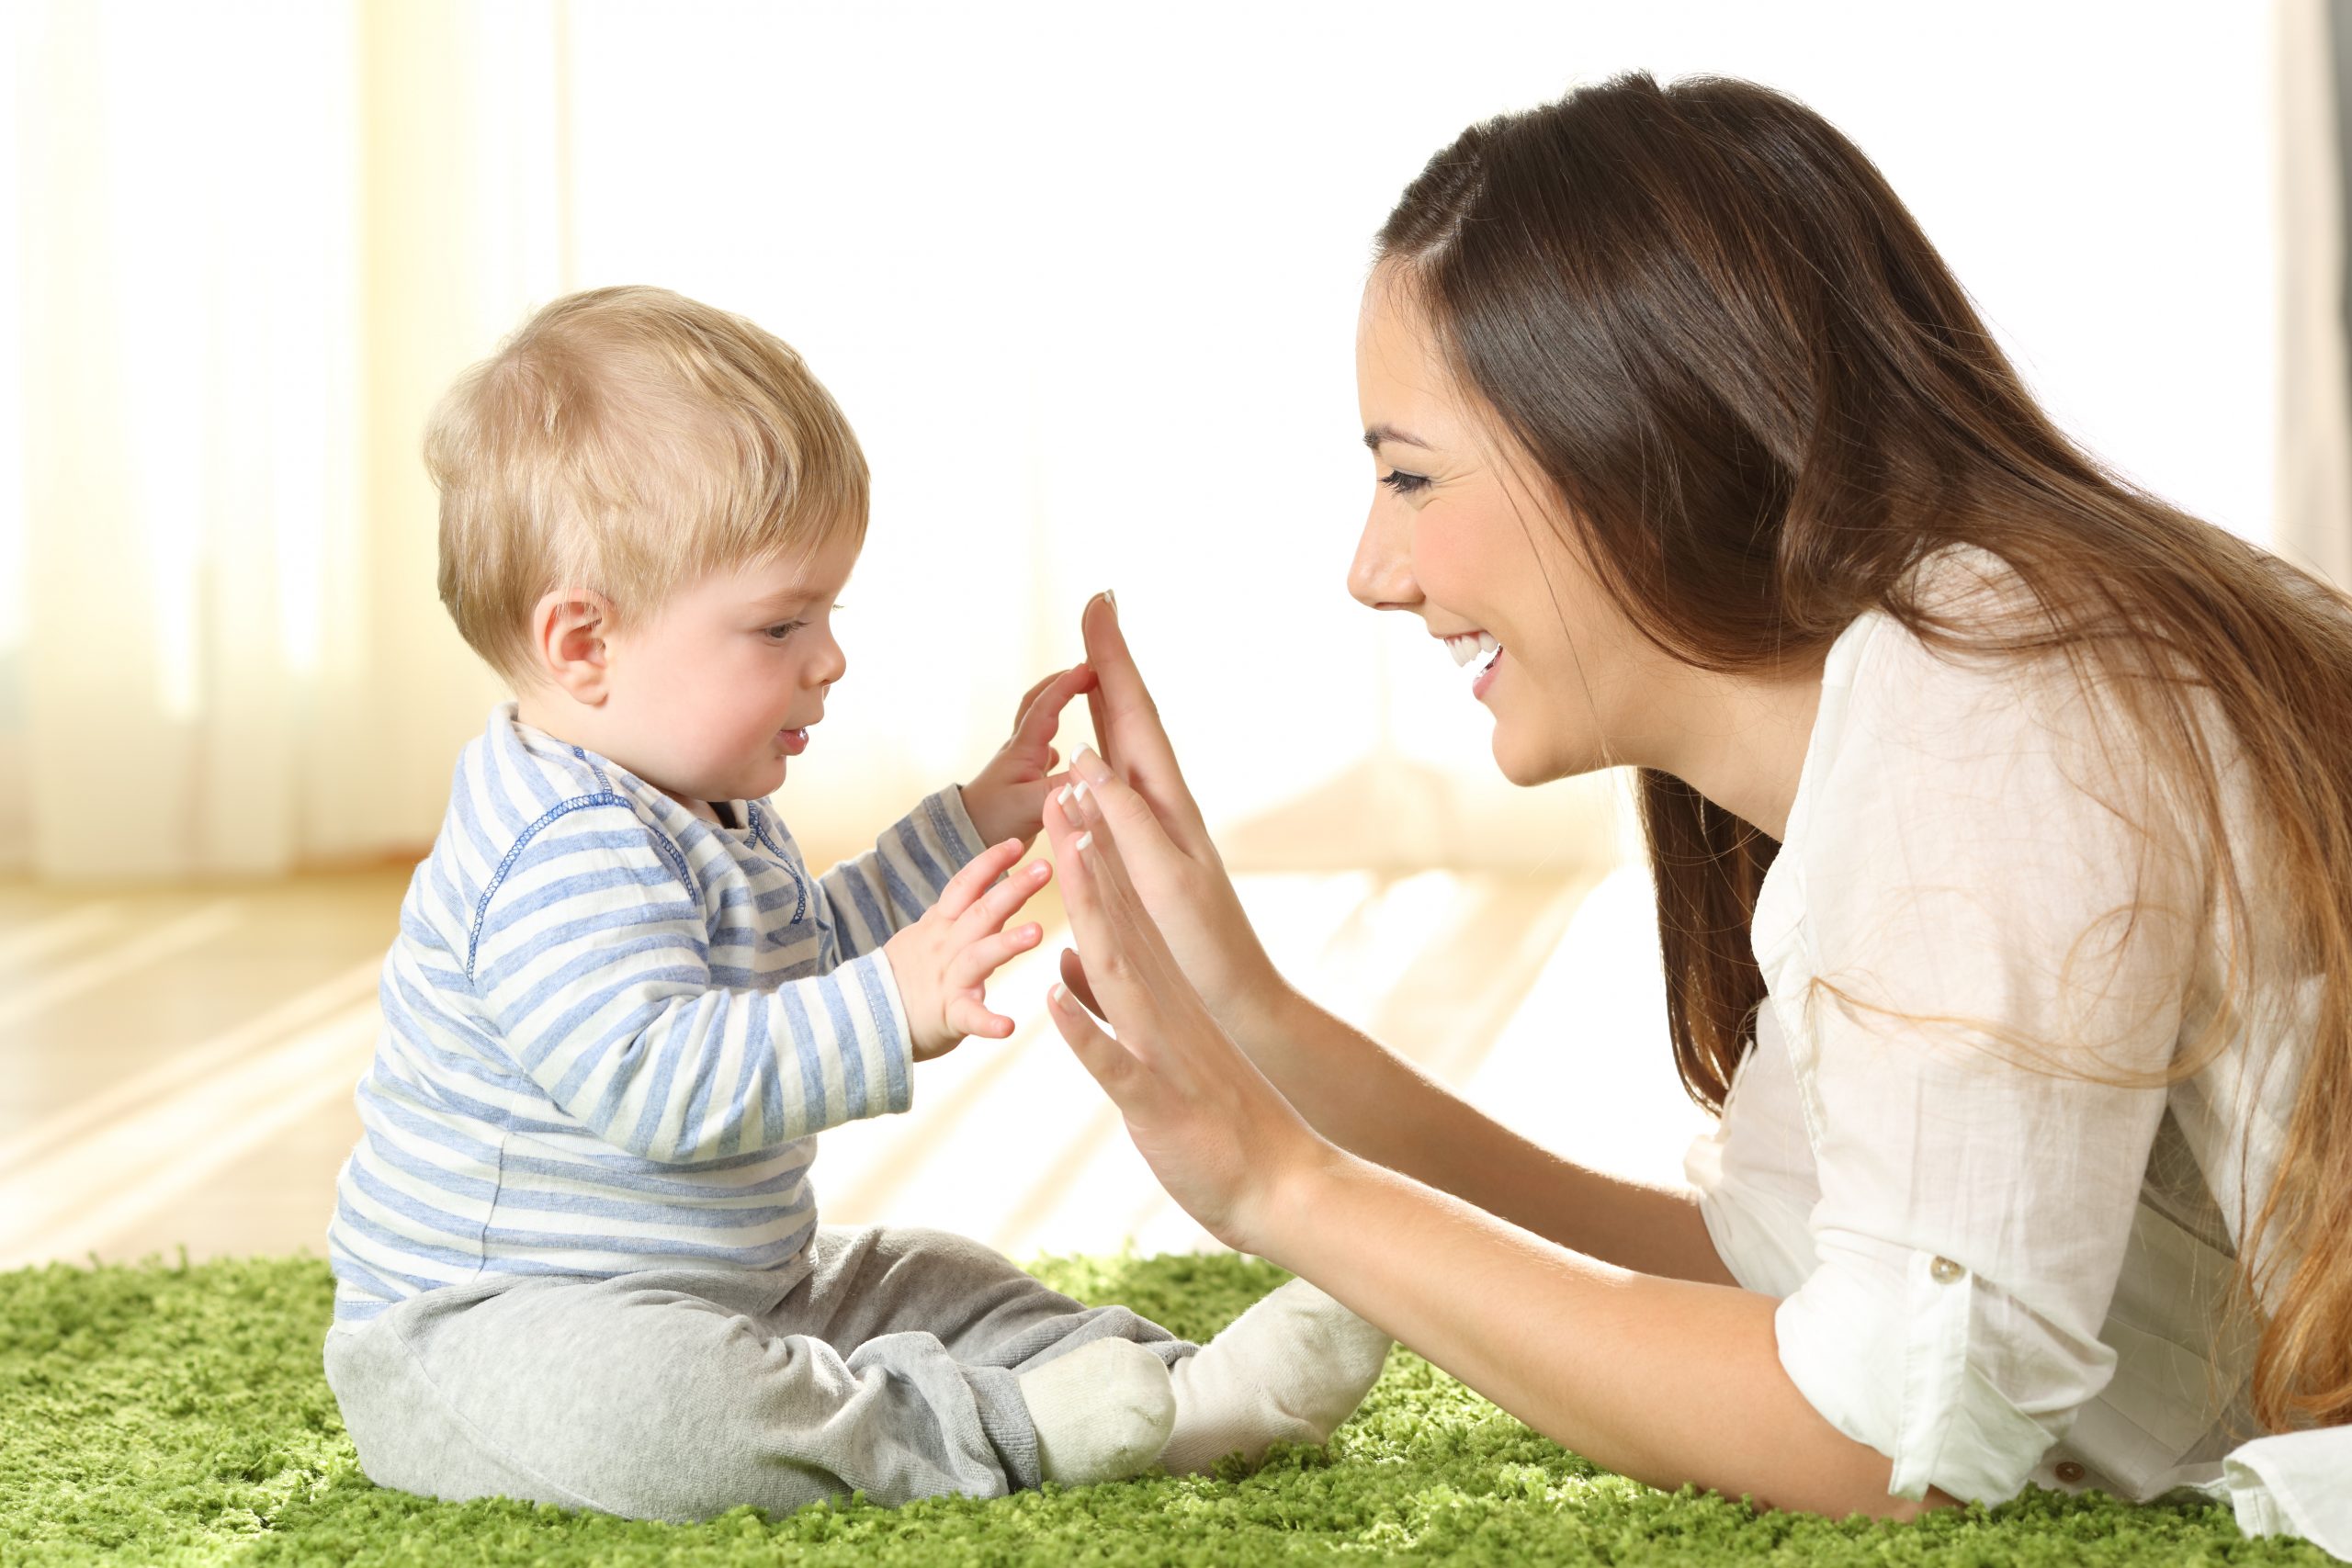 A mother clapping hands with a small child. 